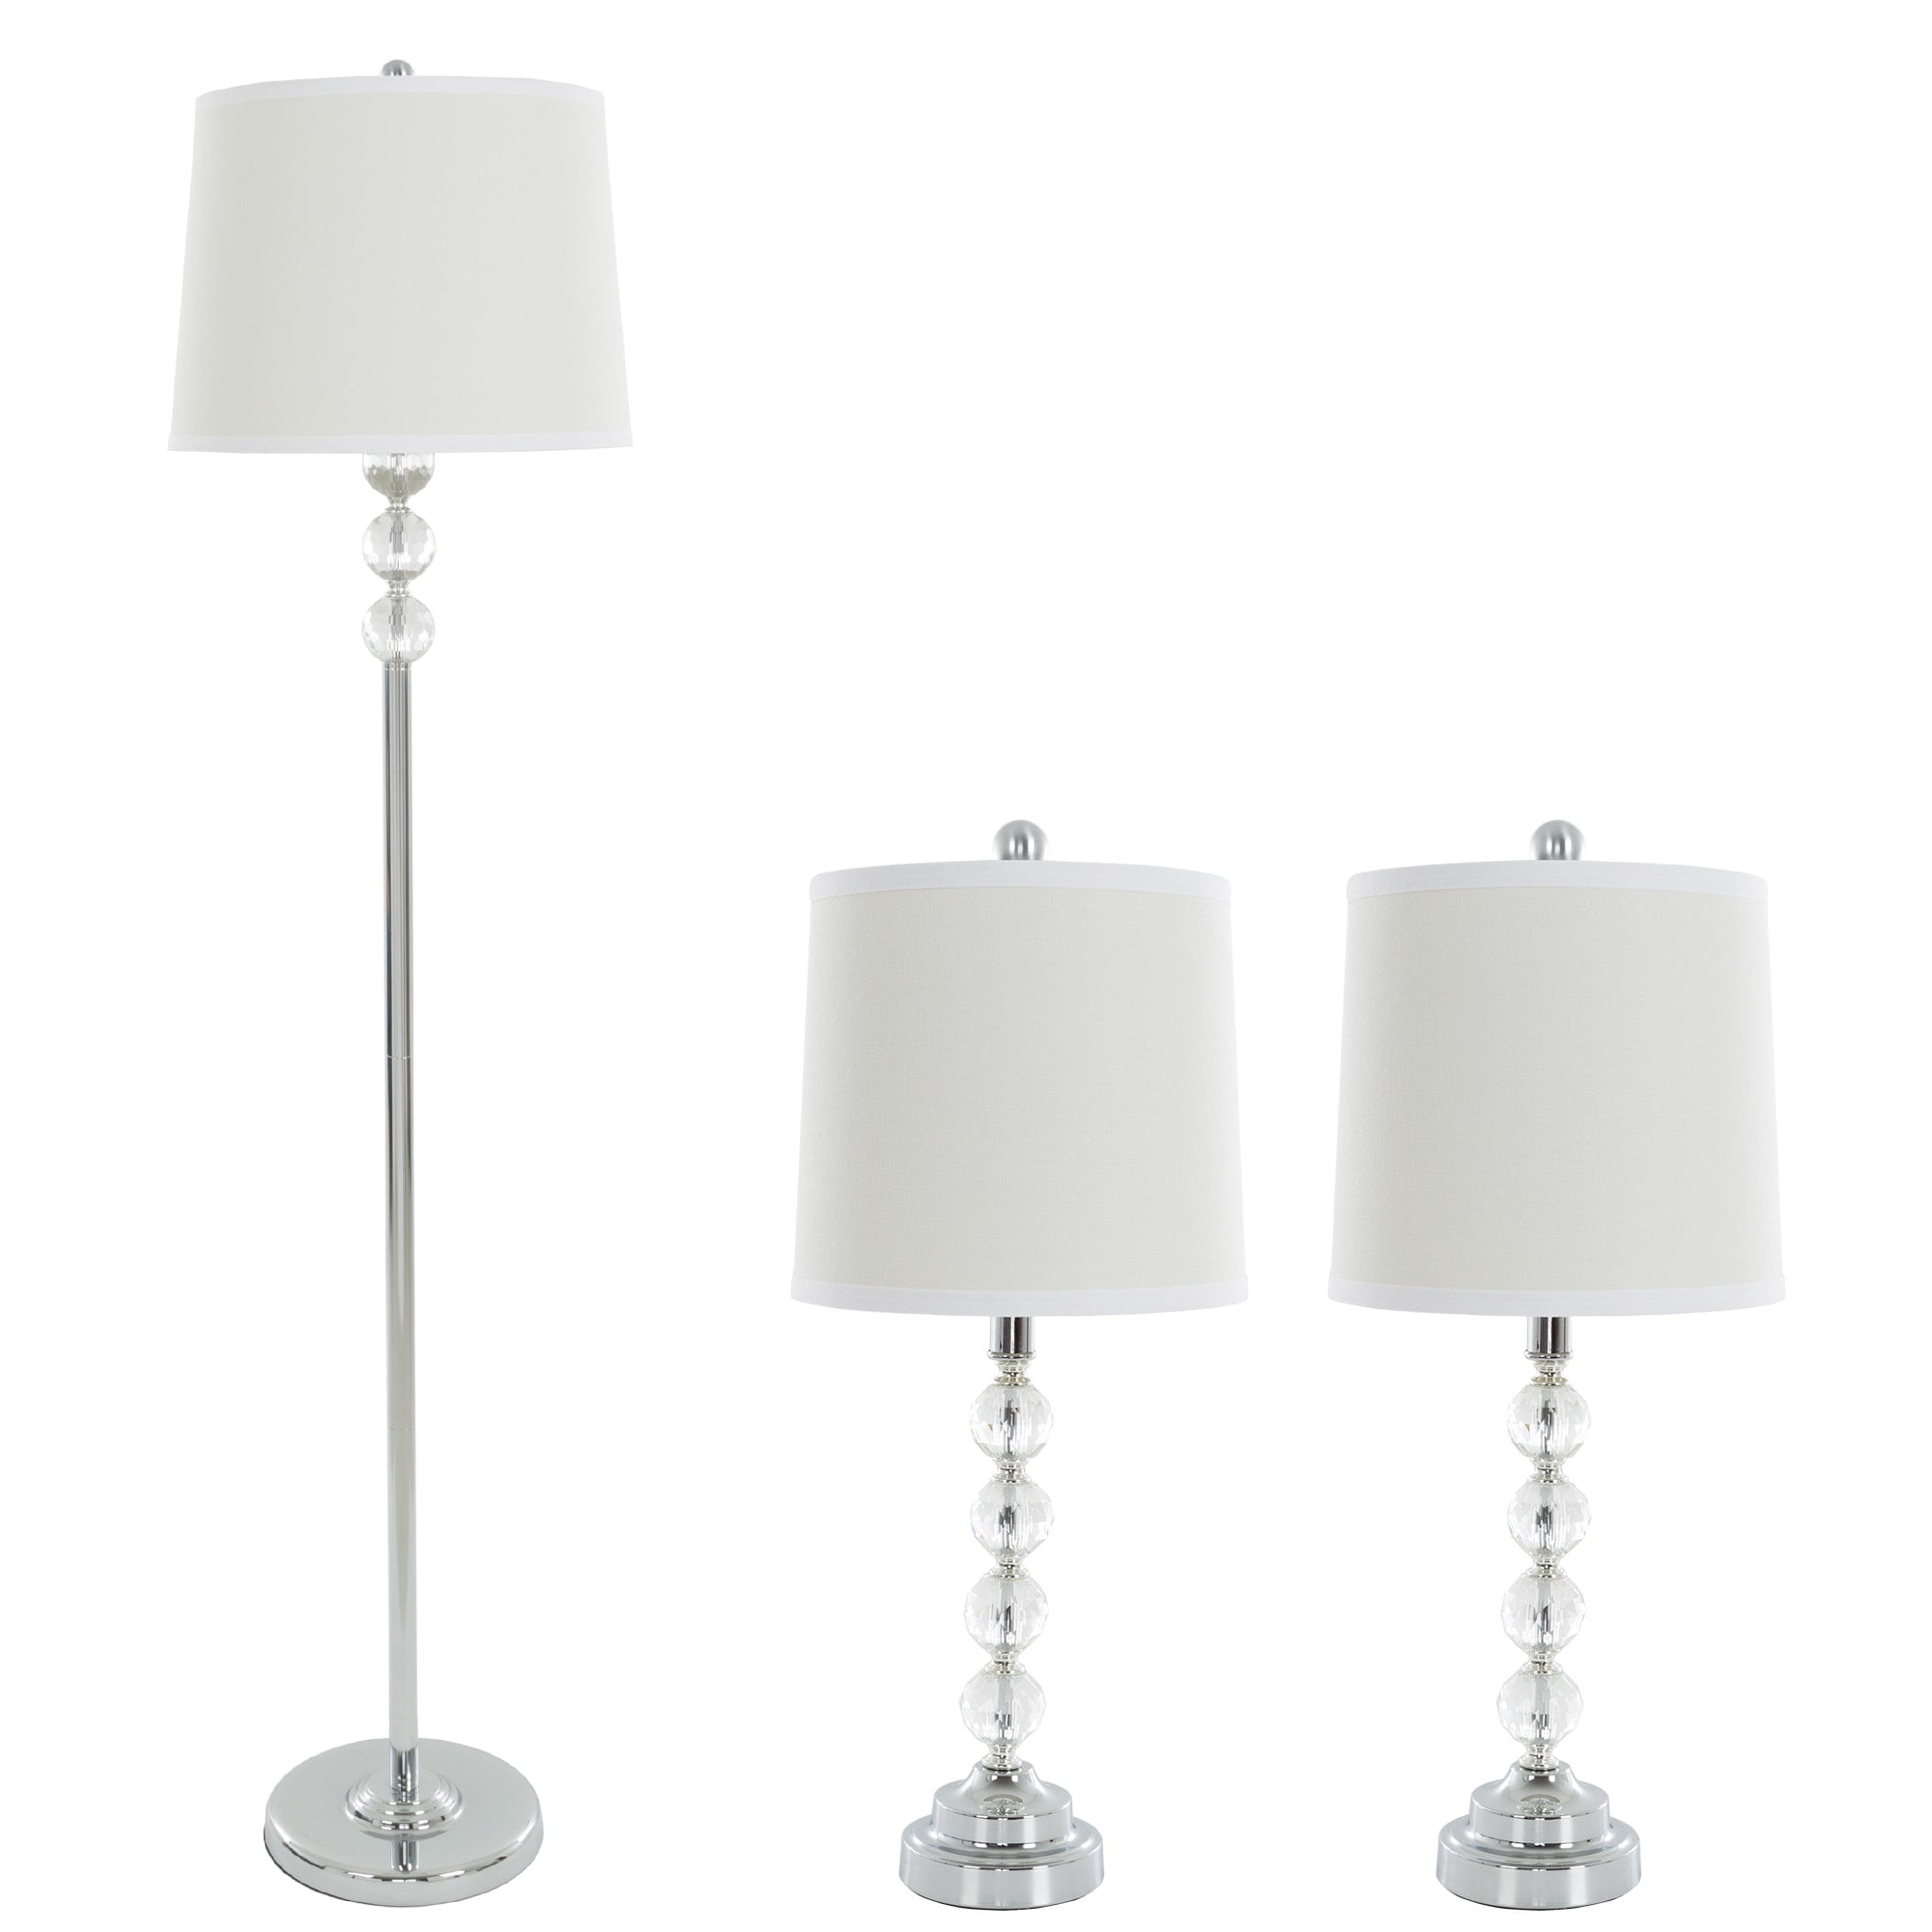 matching floor and table lamps